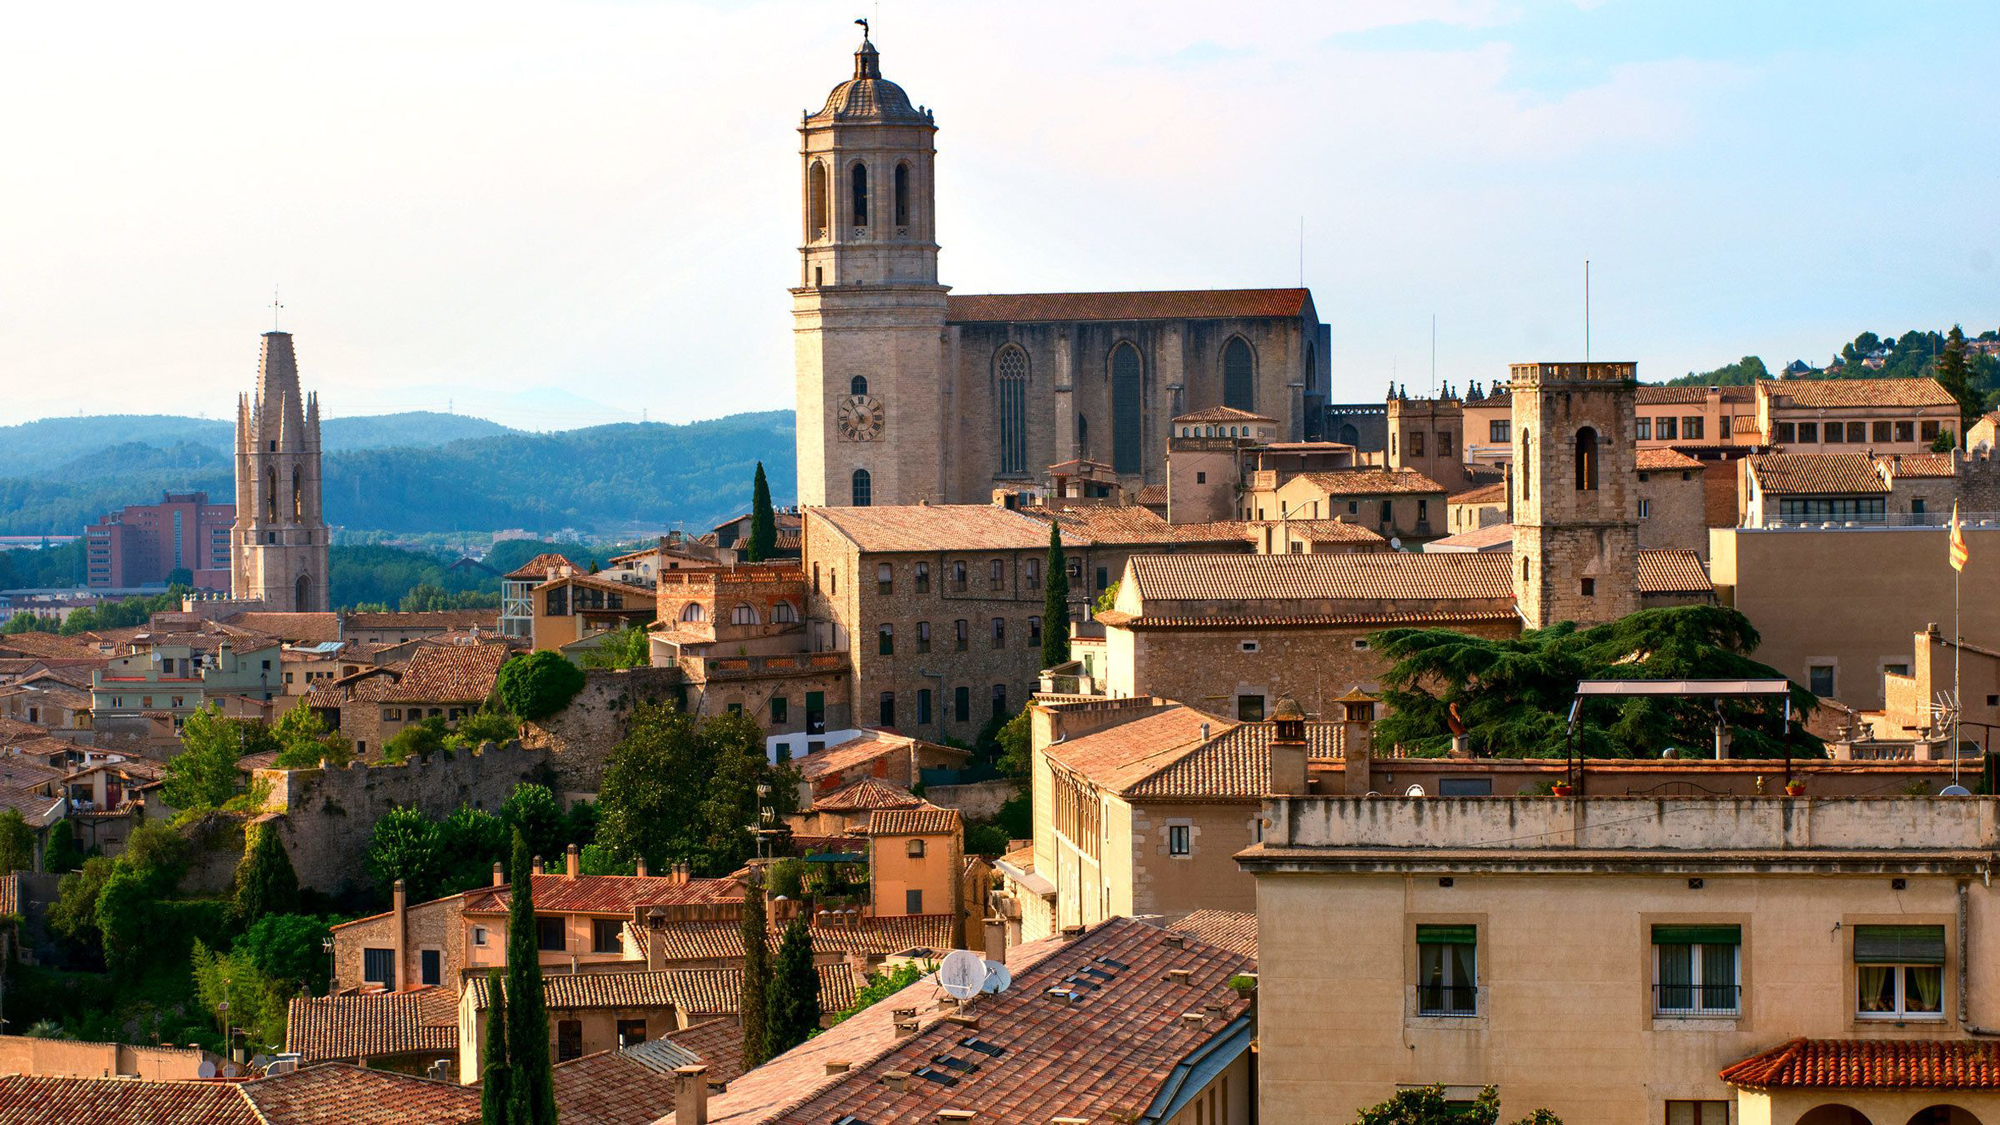 Red tile roofs of the town of Girona in Spain